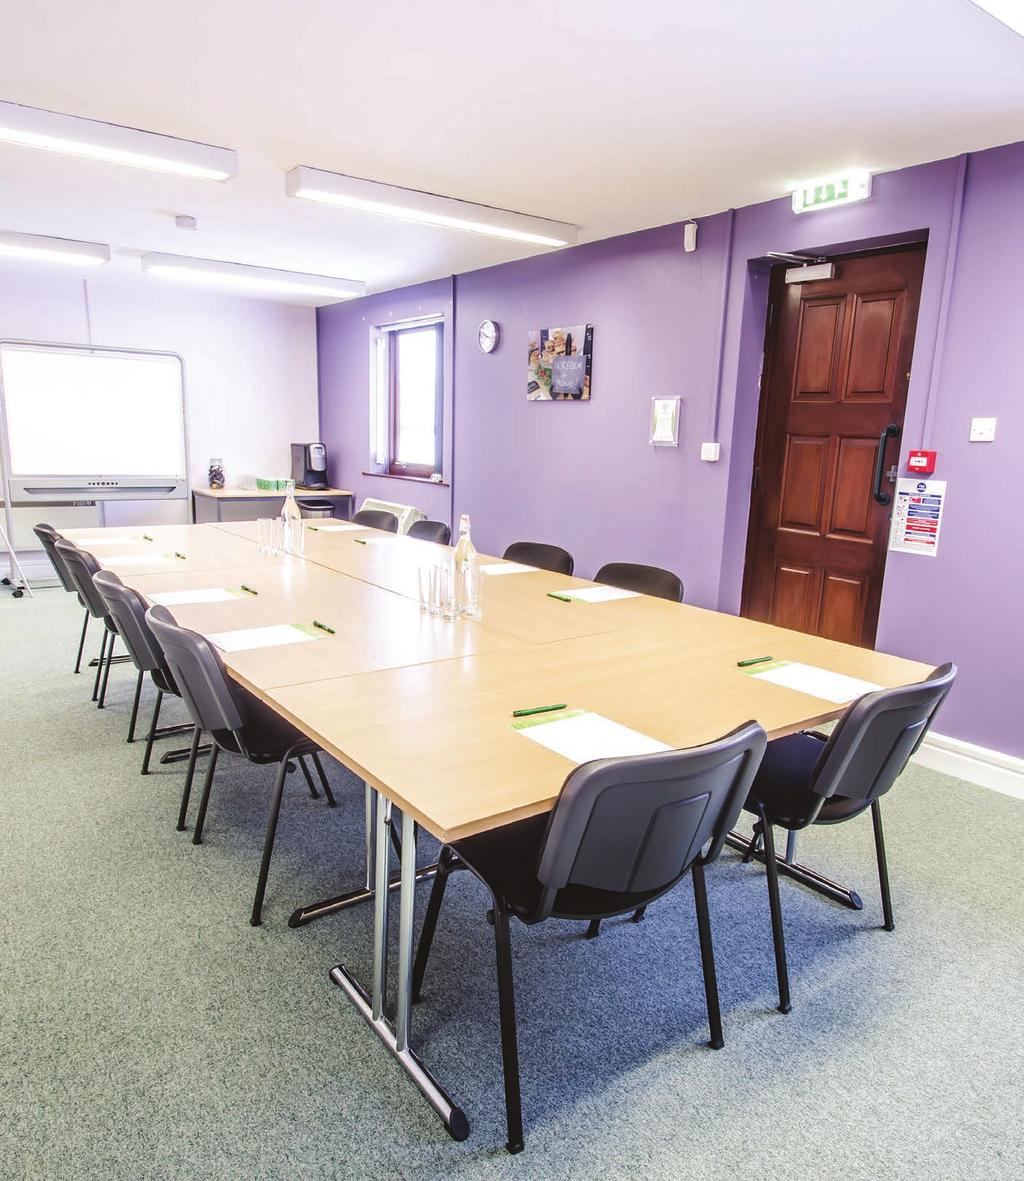 MACGREGOR BUILDING With large windows and attractive views over parkland, the light, purpose-built meeting rooms in the MacGregor Building make it the ideal space for meetings, workshops and training